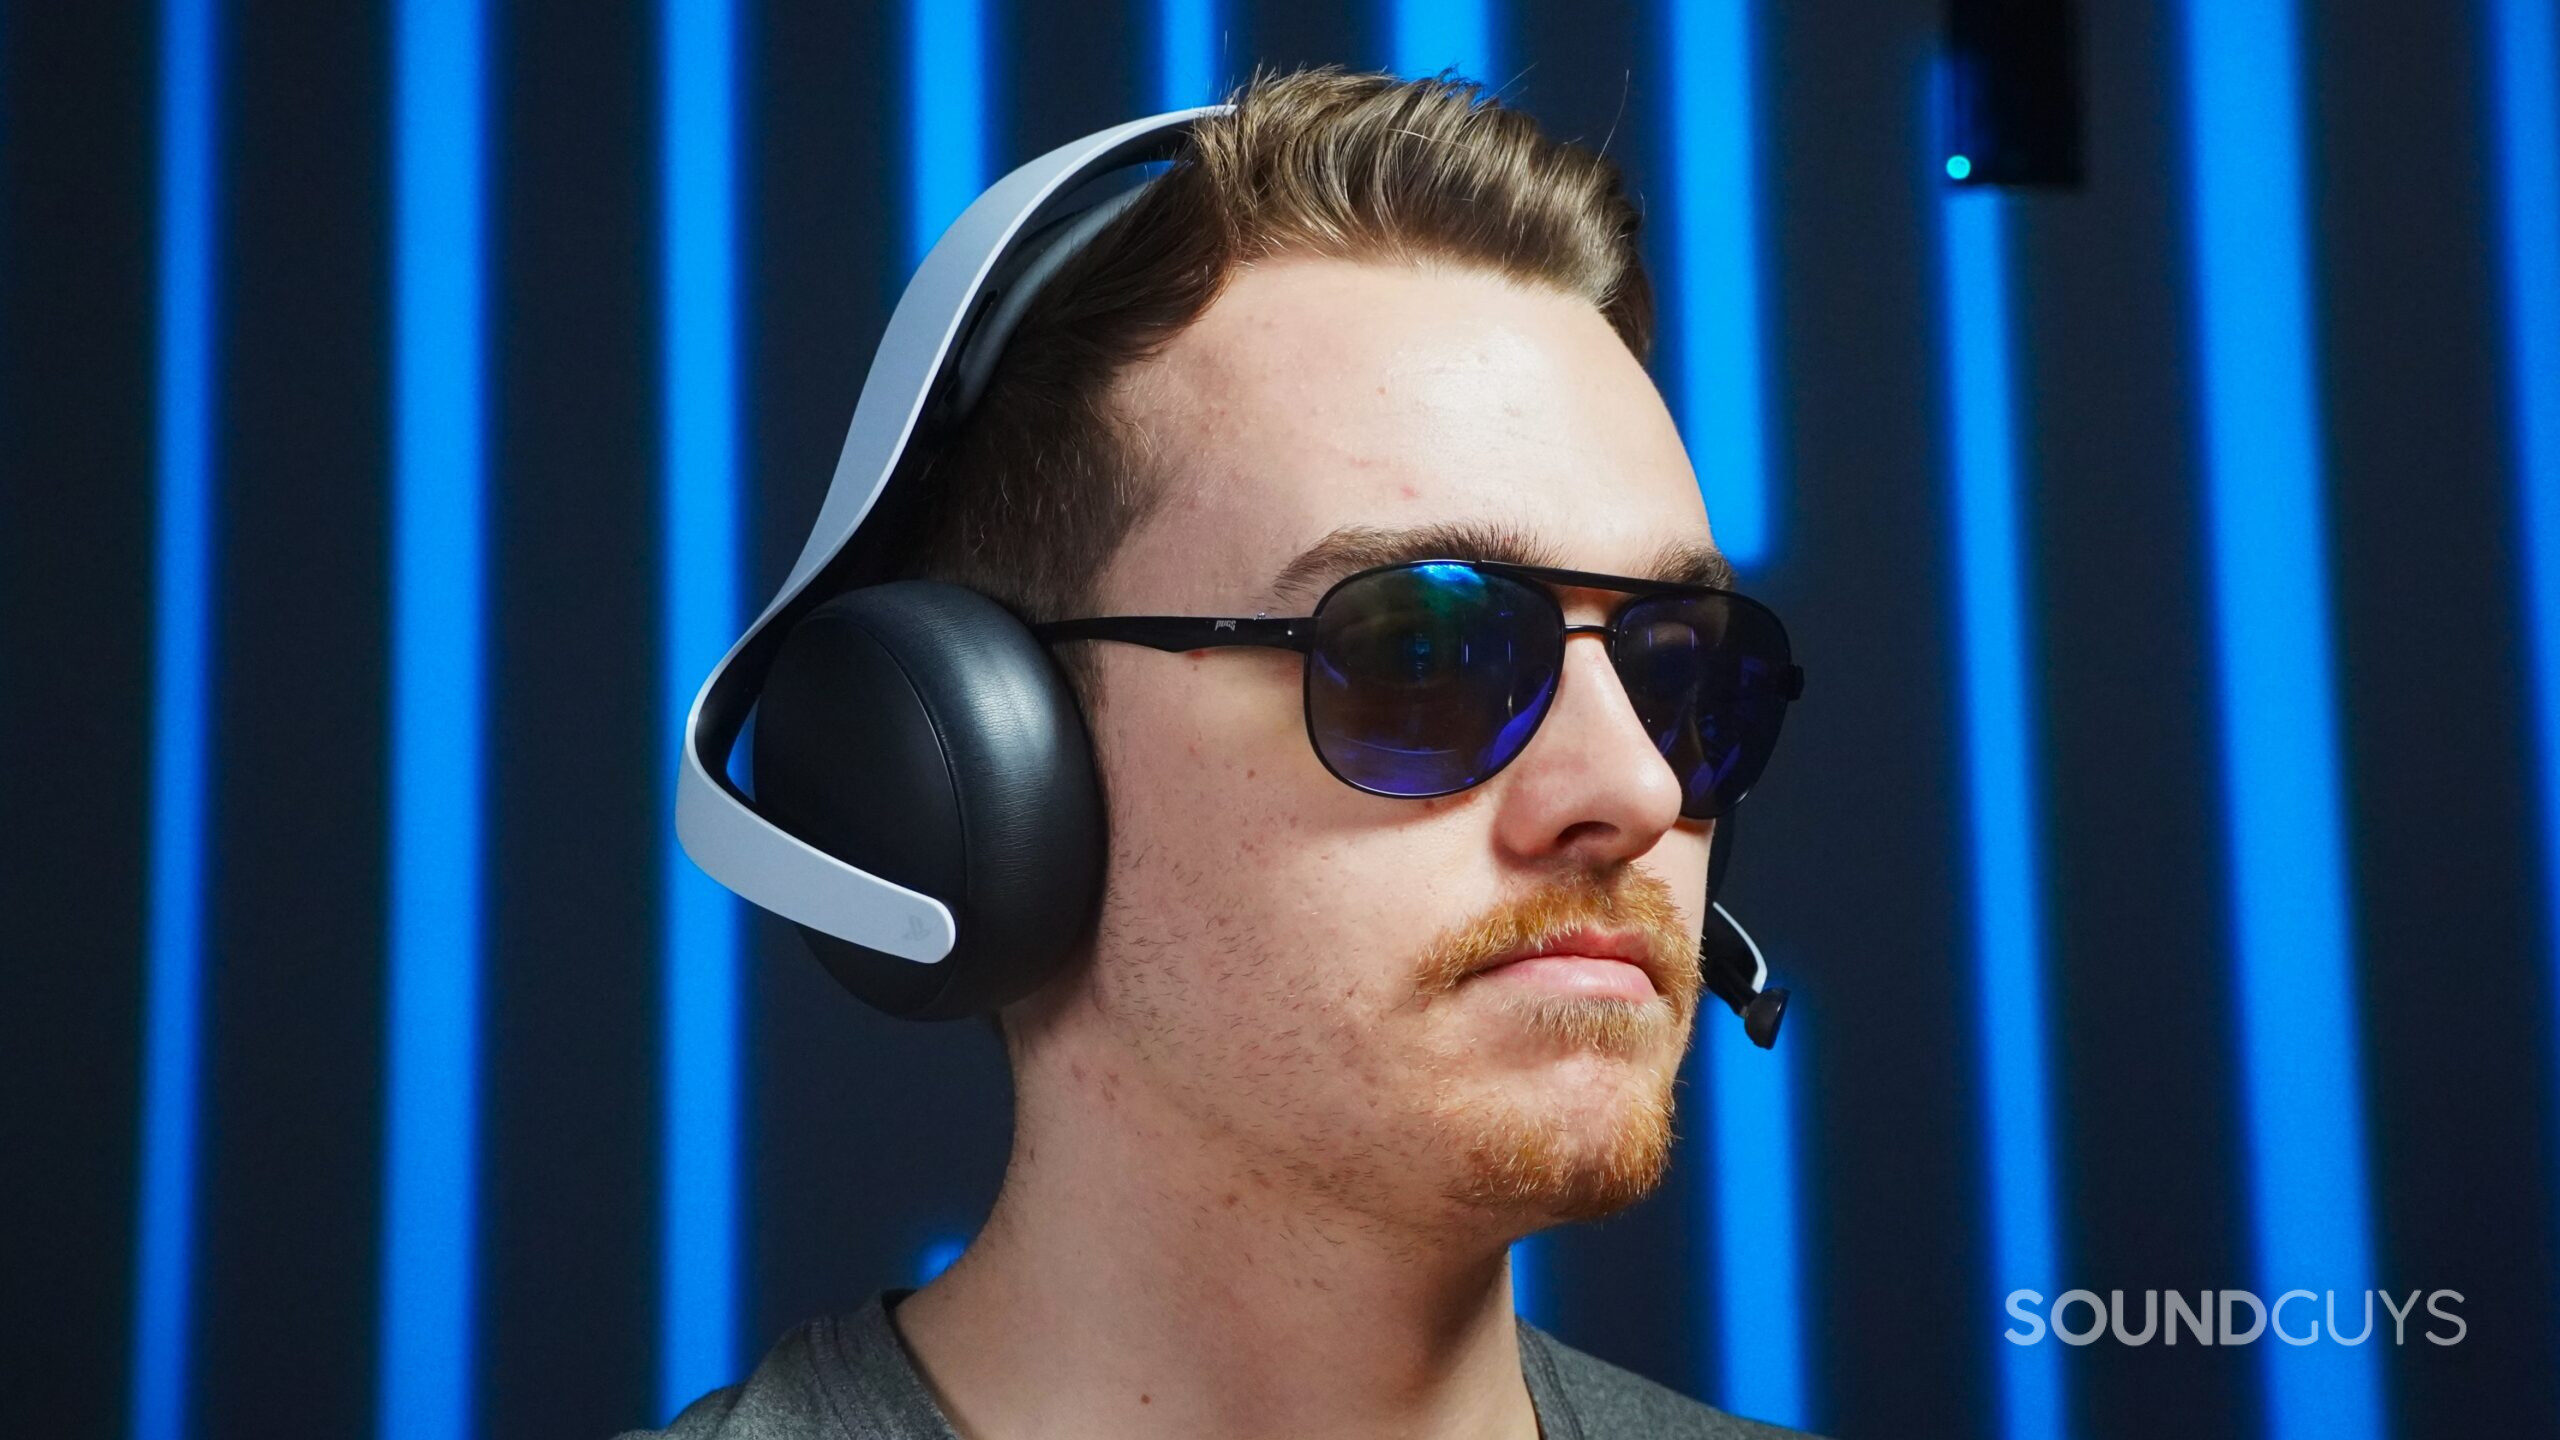 A mean wearing the PlayStation Pulse Explore headset while wearing sunglasses.